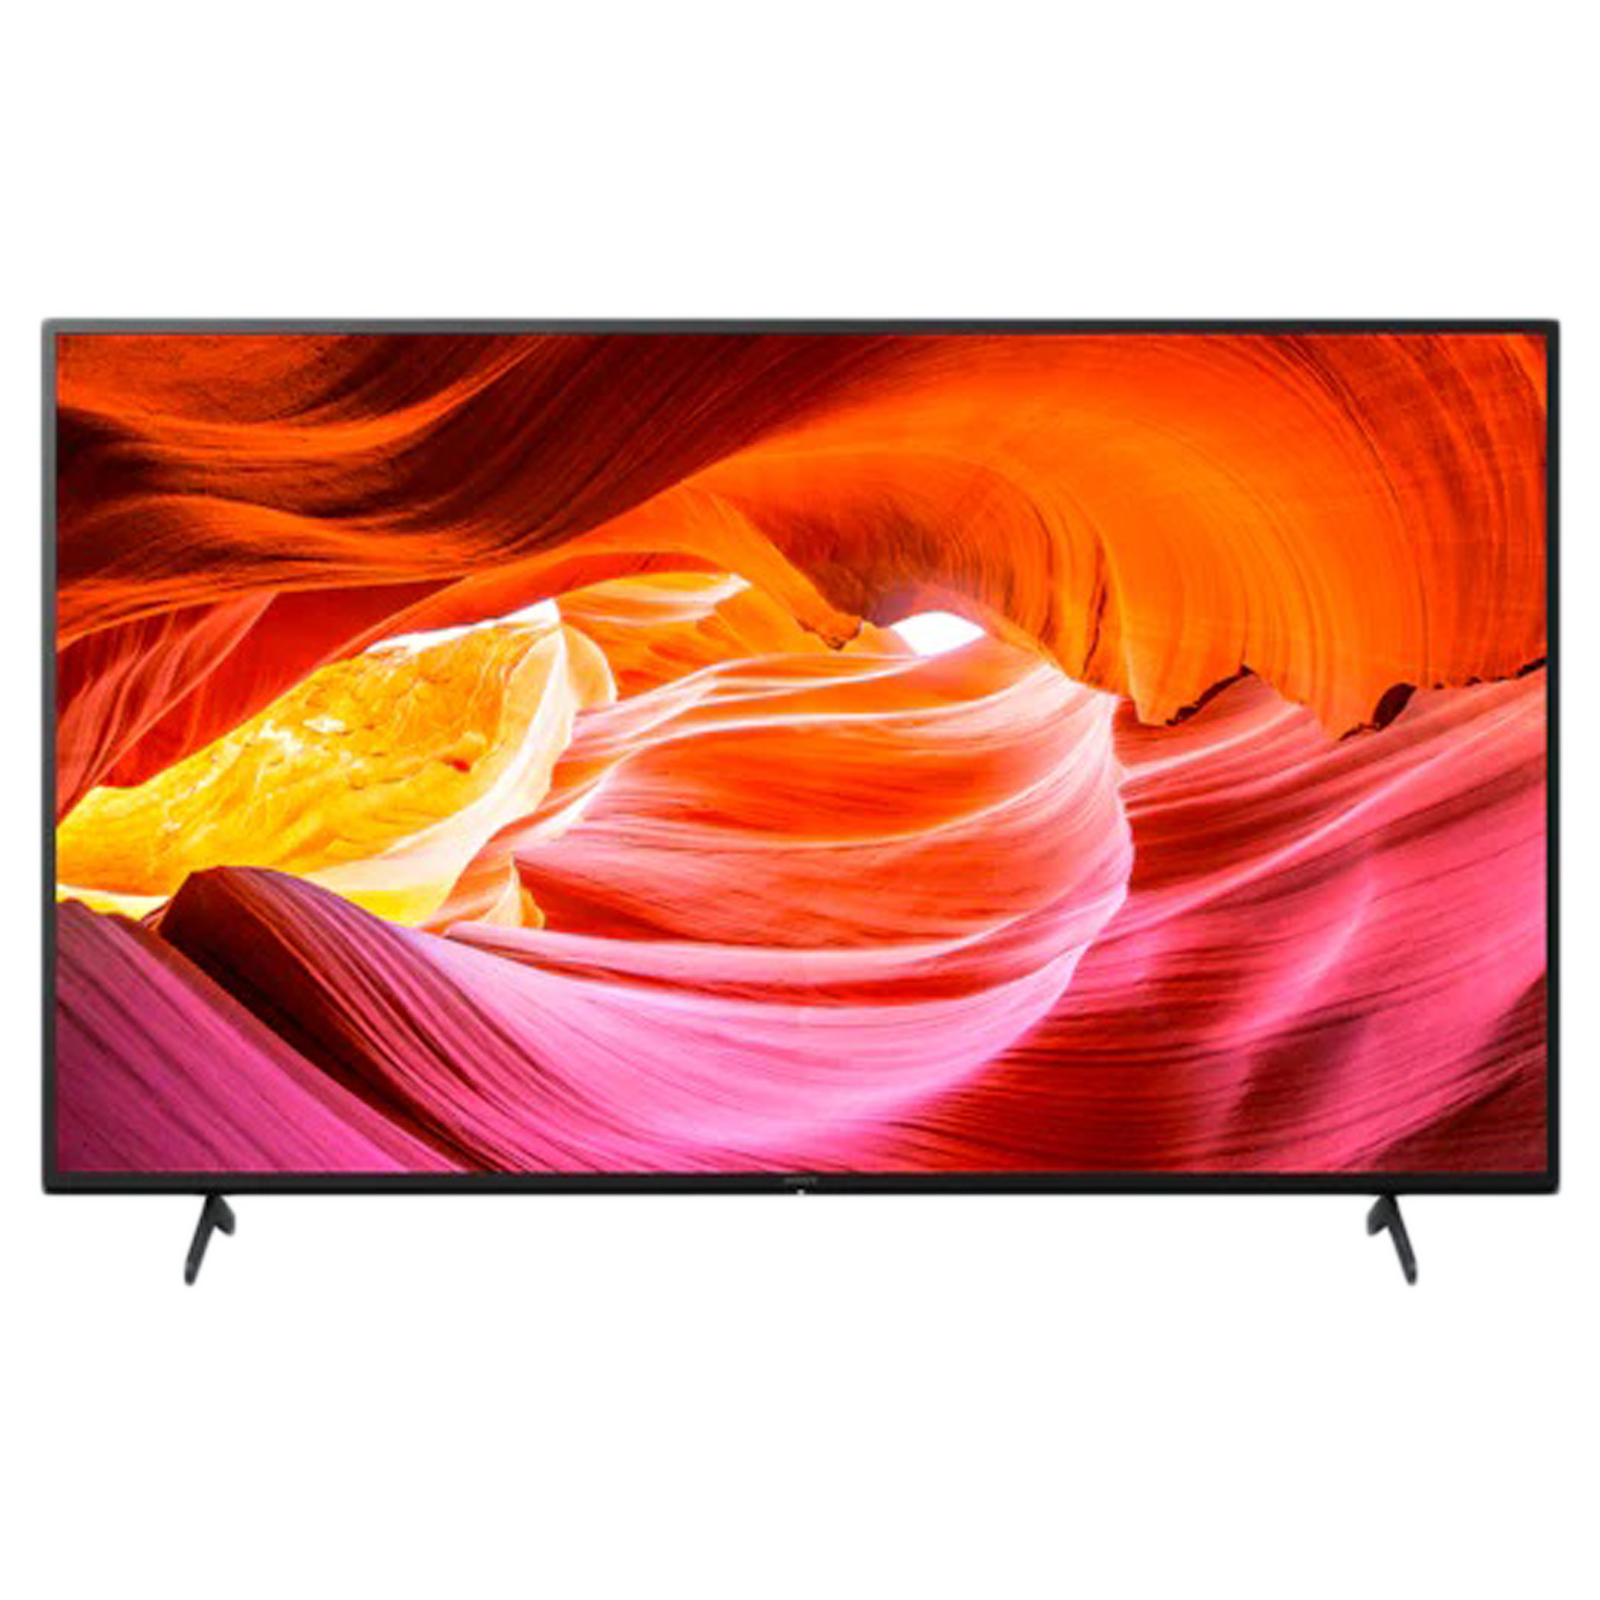 [For ICICI Card] SONY 139cm (55 Inch) Ultra HD 4K LED Android Smart TV